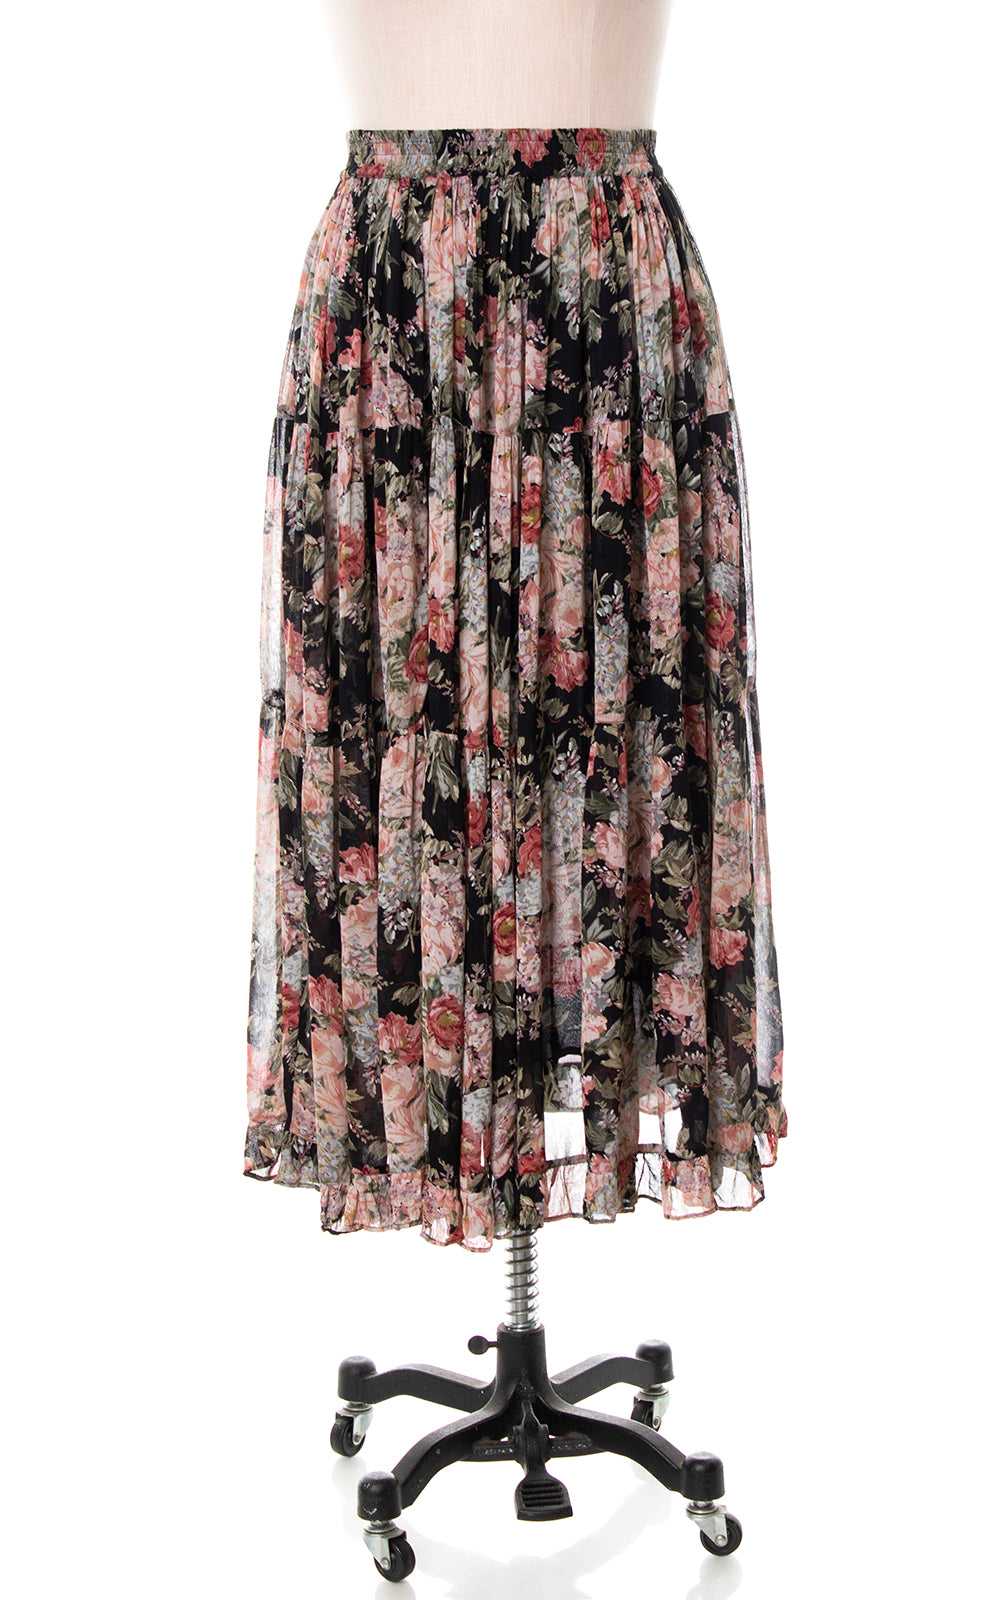 1980s Floral Rayon Tiered Skirt | small/medium - image 3